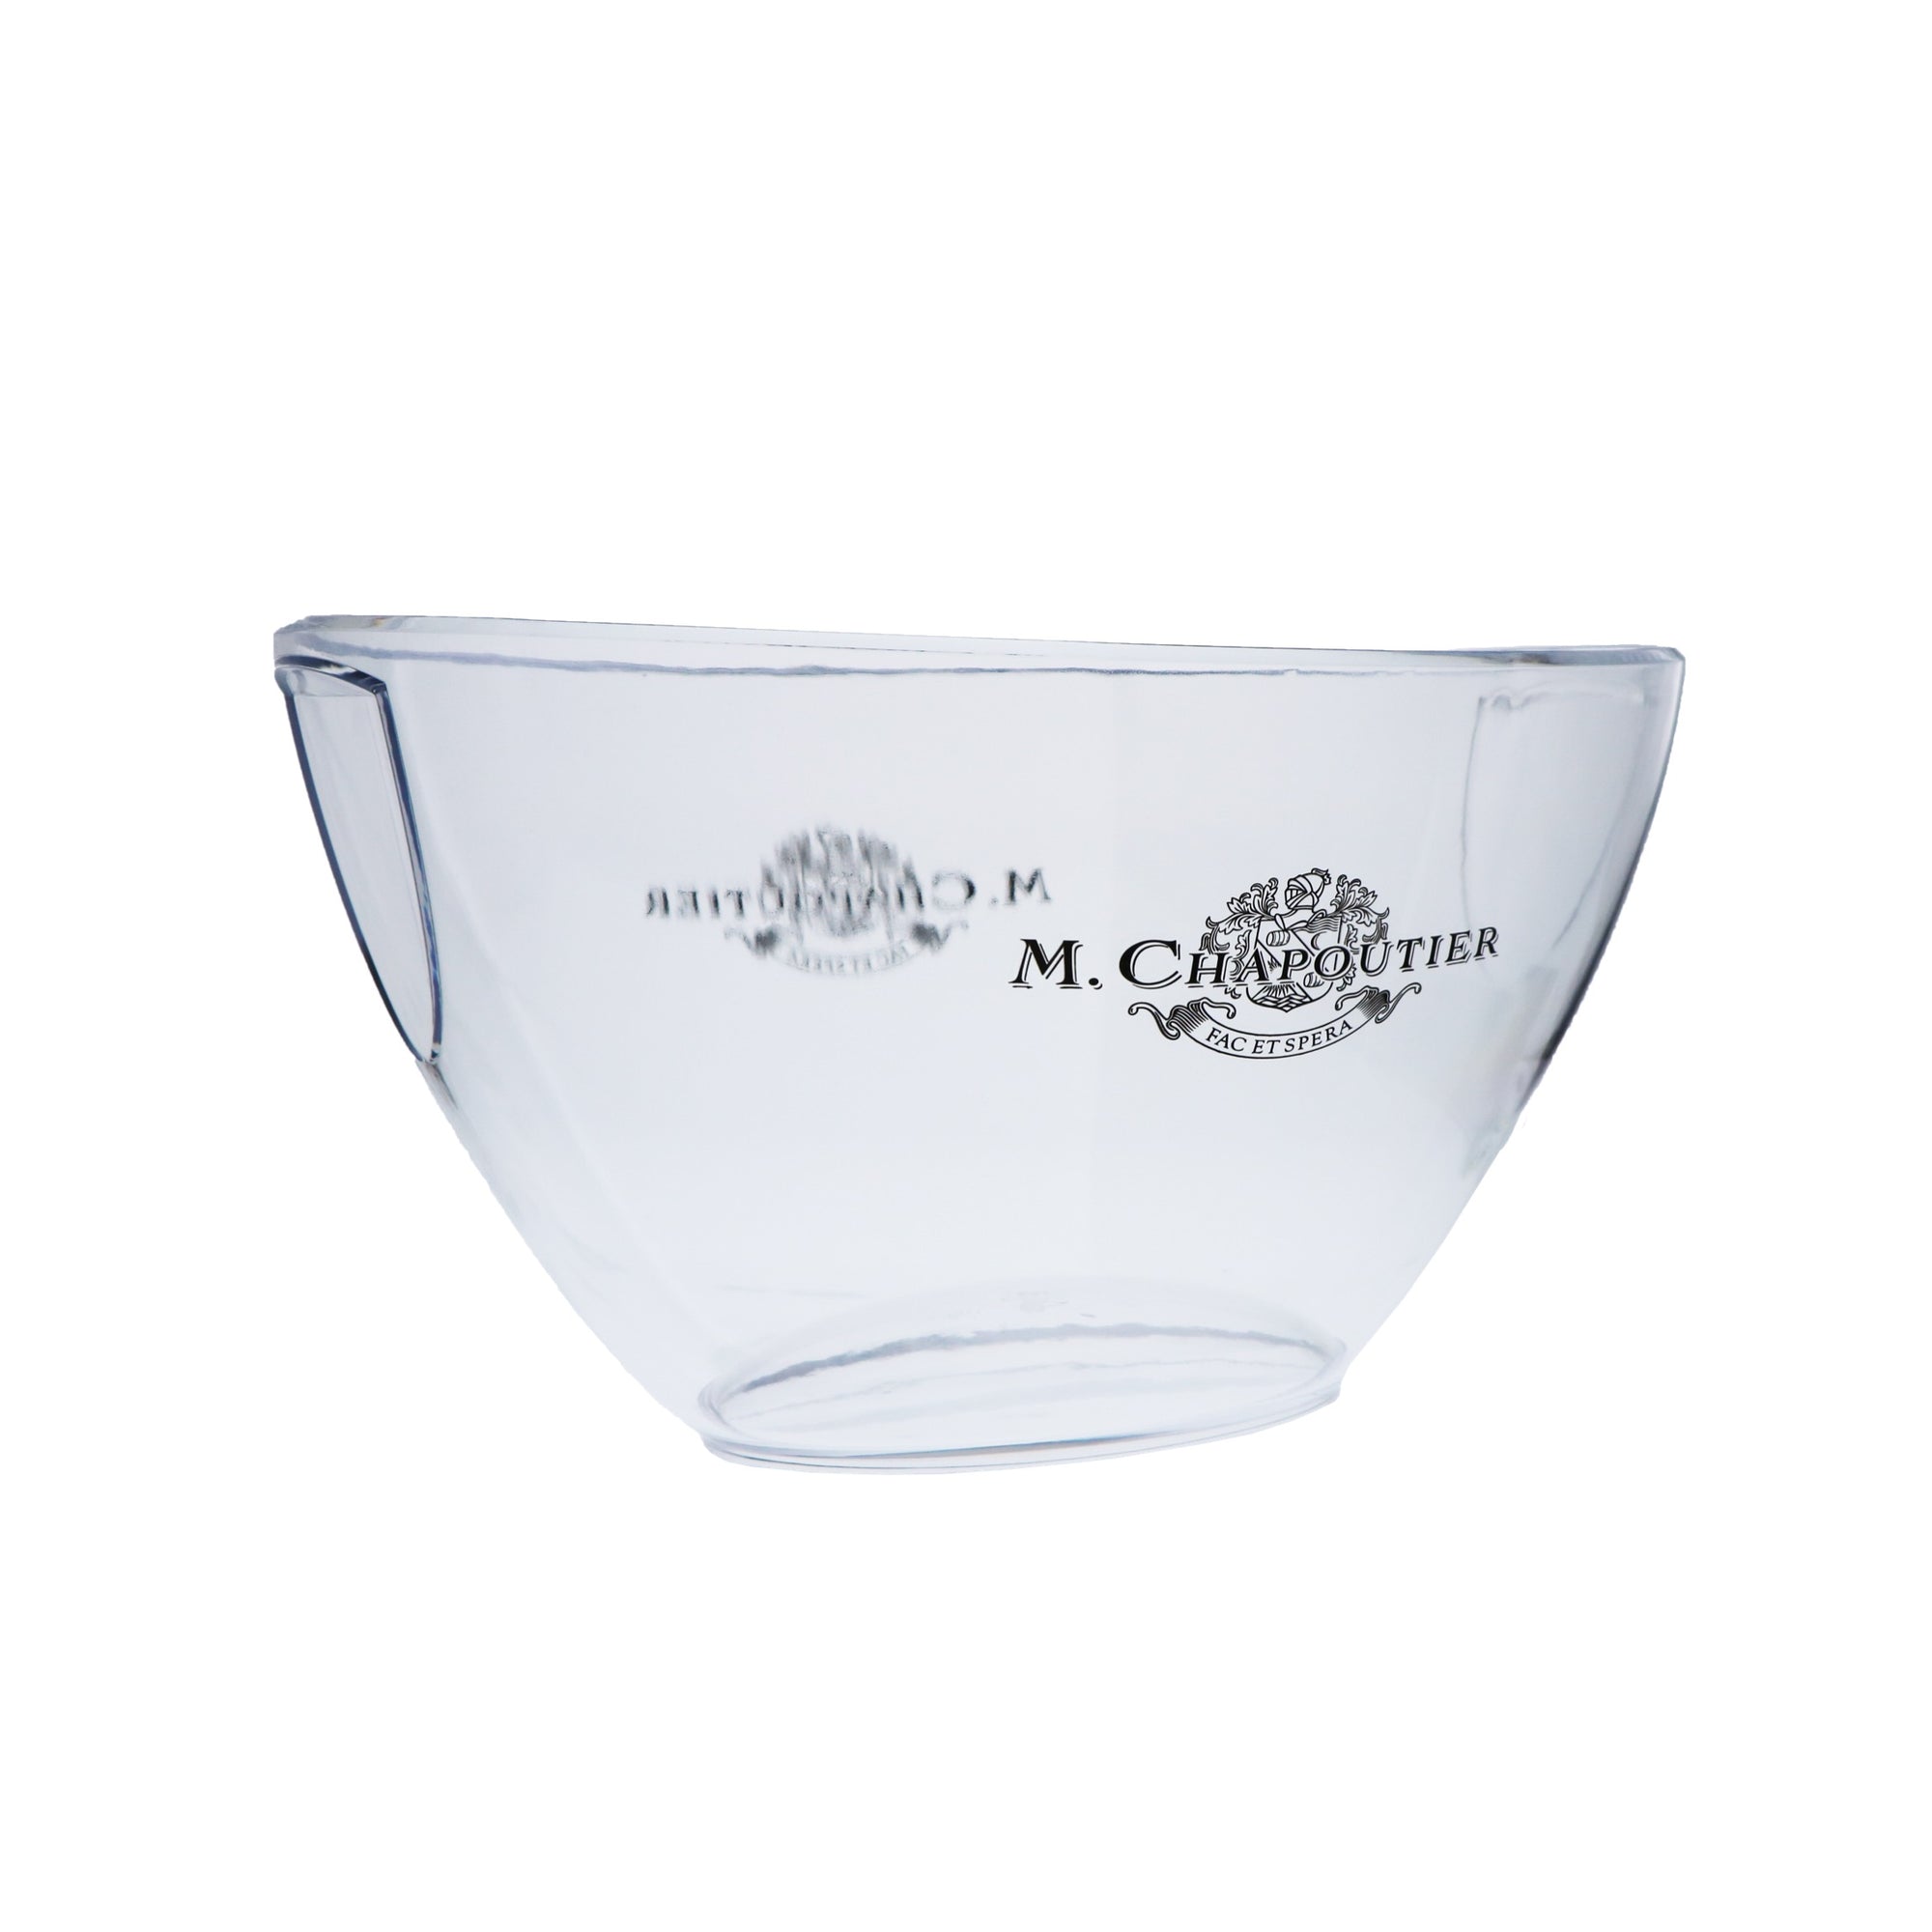 M. CHAPOUTIER - New Ice bucket 2019